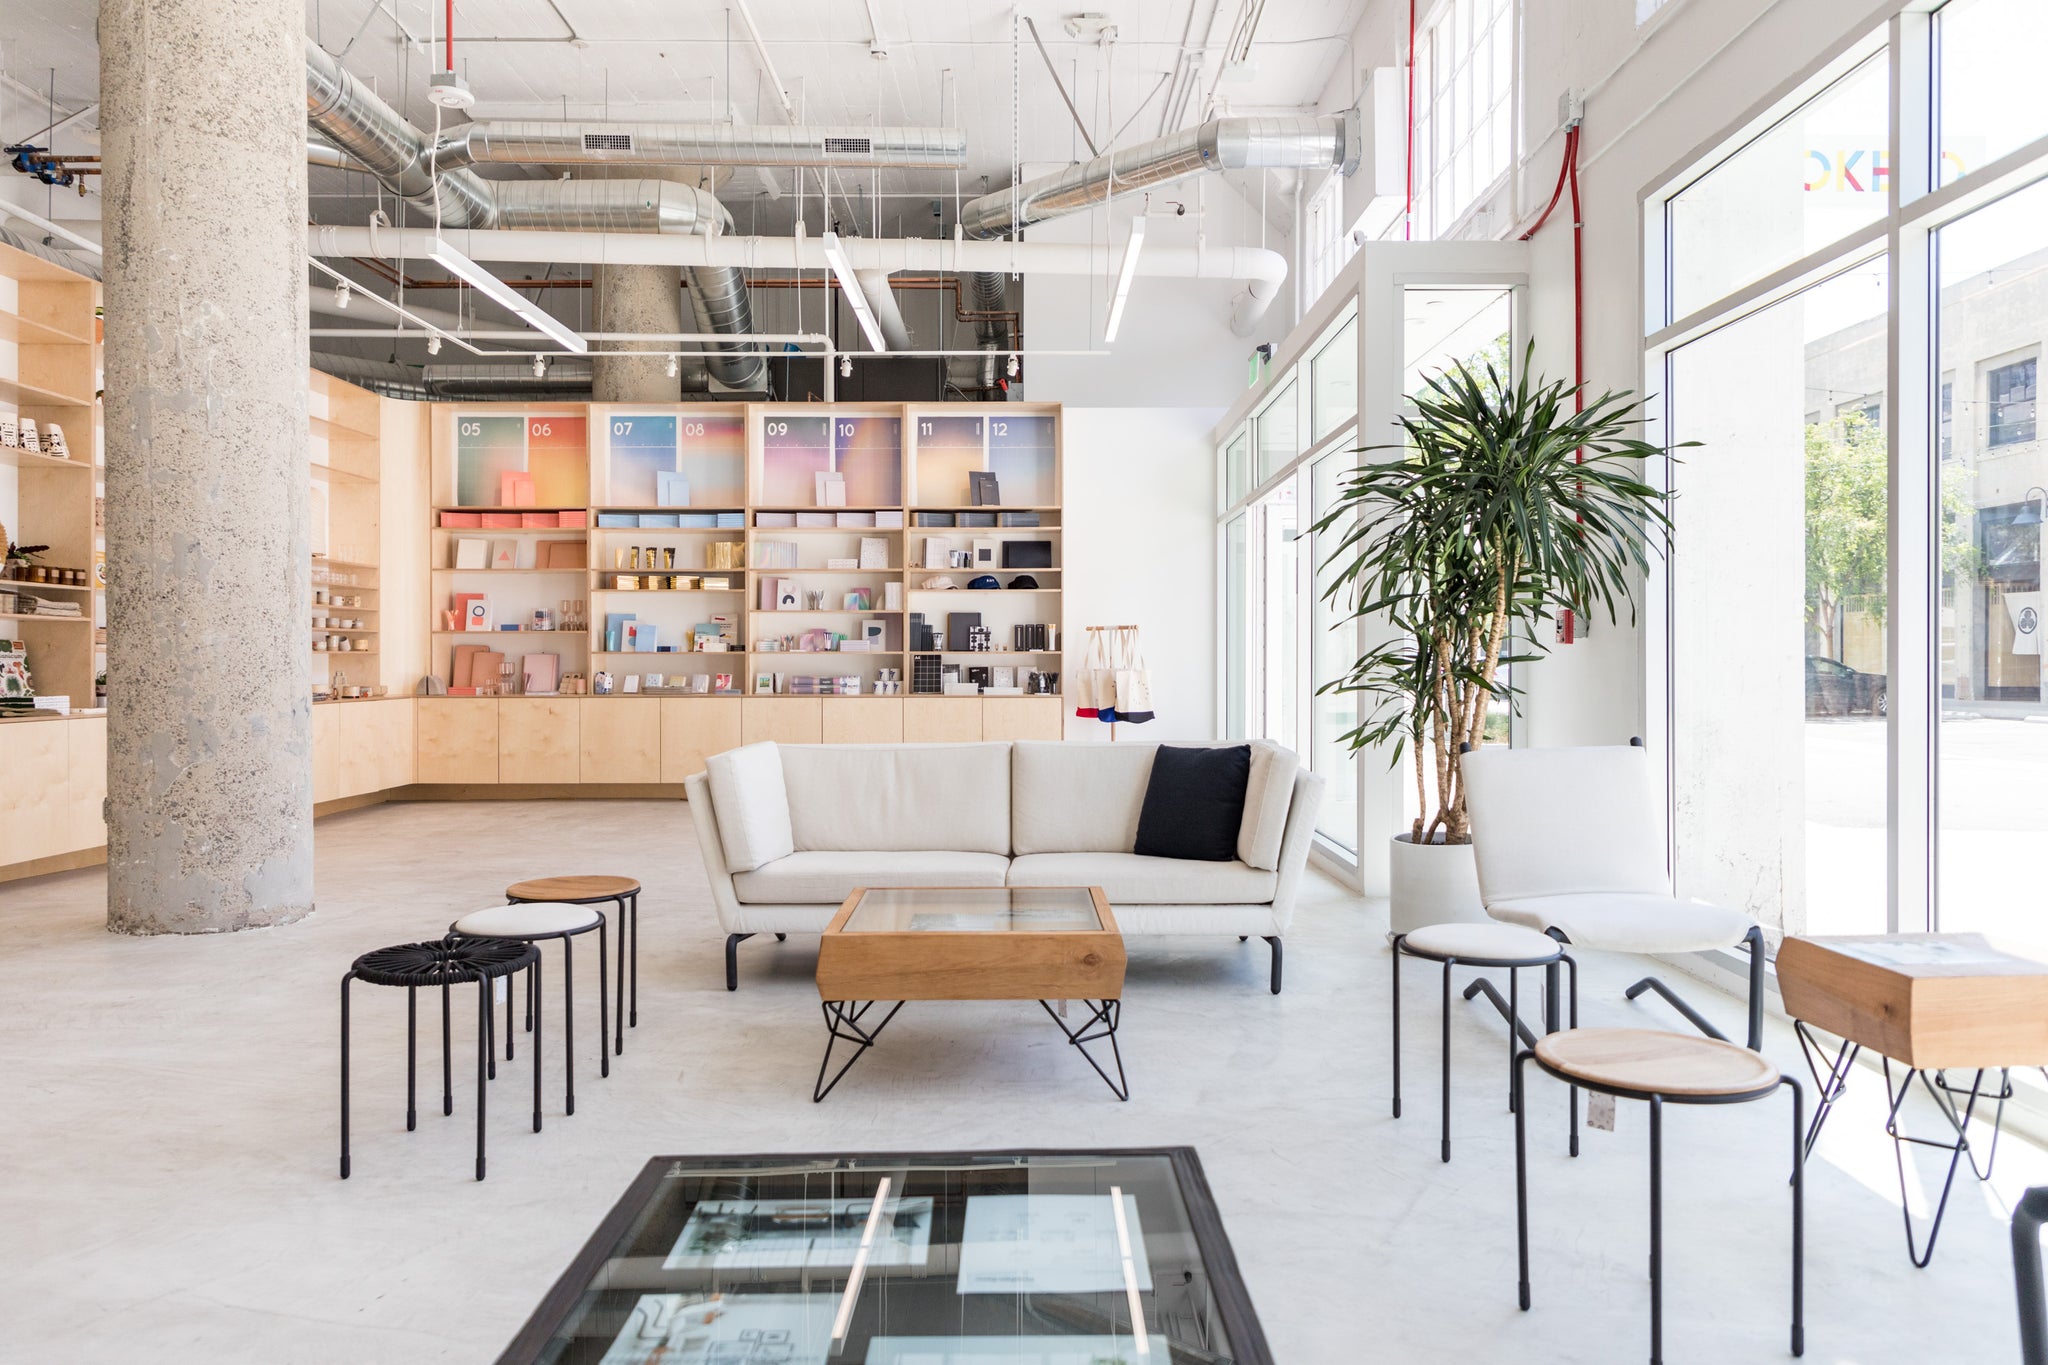 The Poketo Project Space @ ROW DTLA, one of four stores across LA.